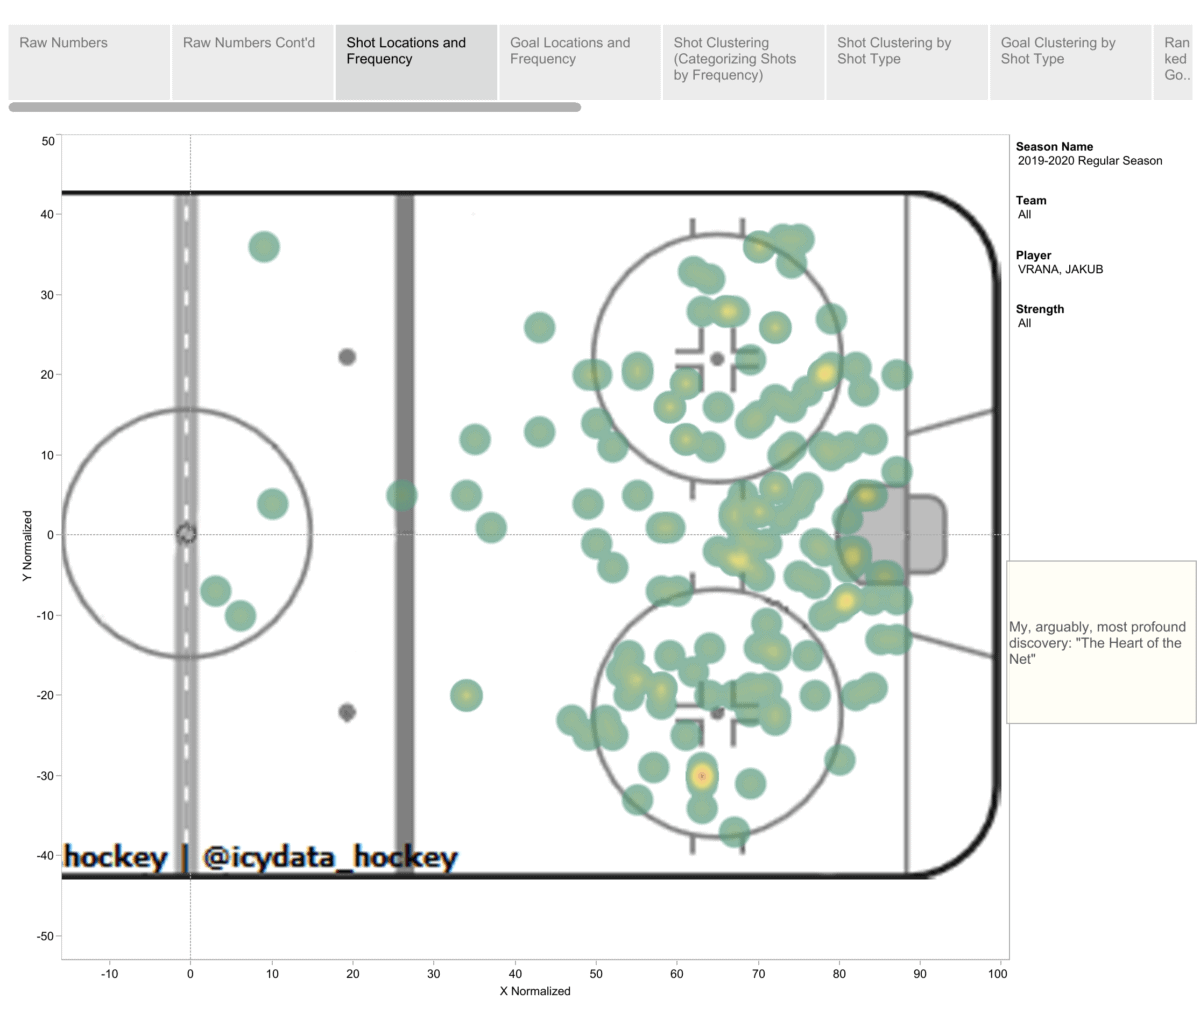 This chart is a heat map which shows where all of Jakub Vrana of the Washington Capitals' shots came from during the 2019-20 regular season.